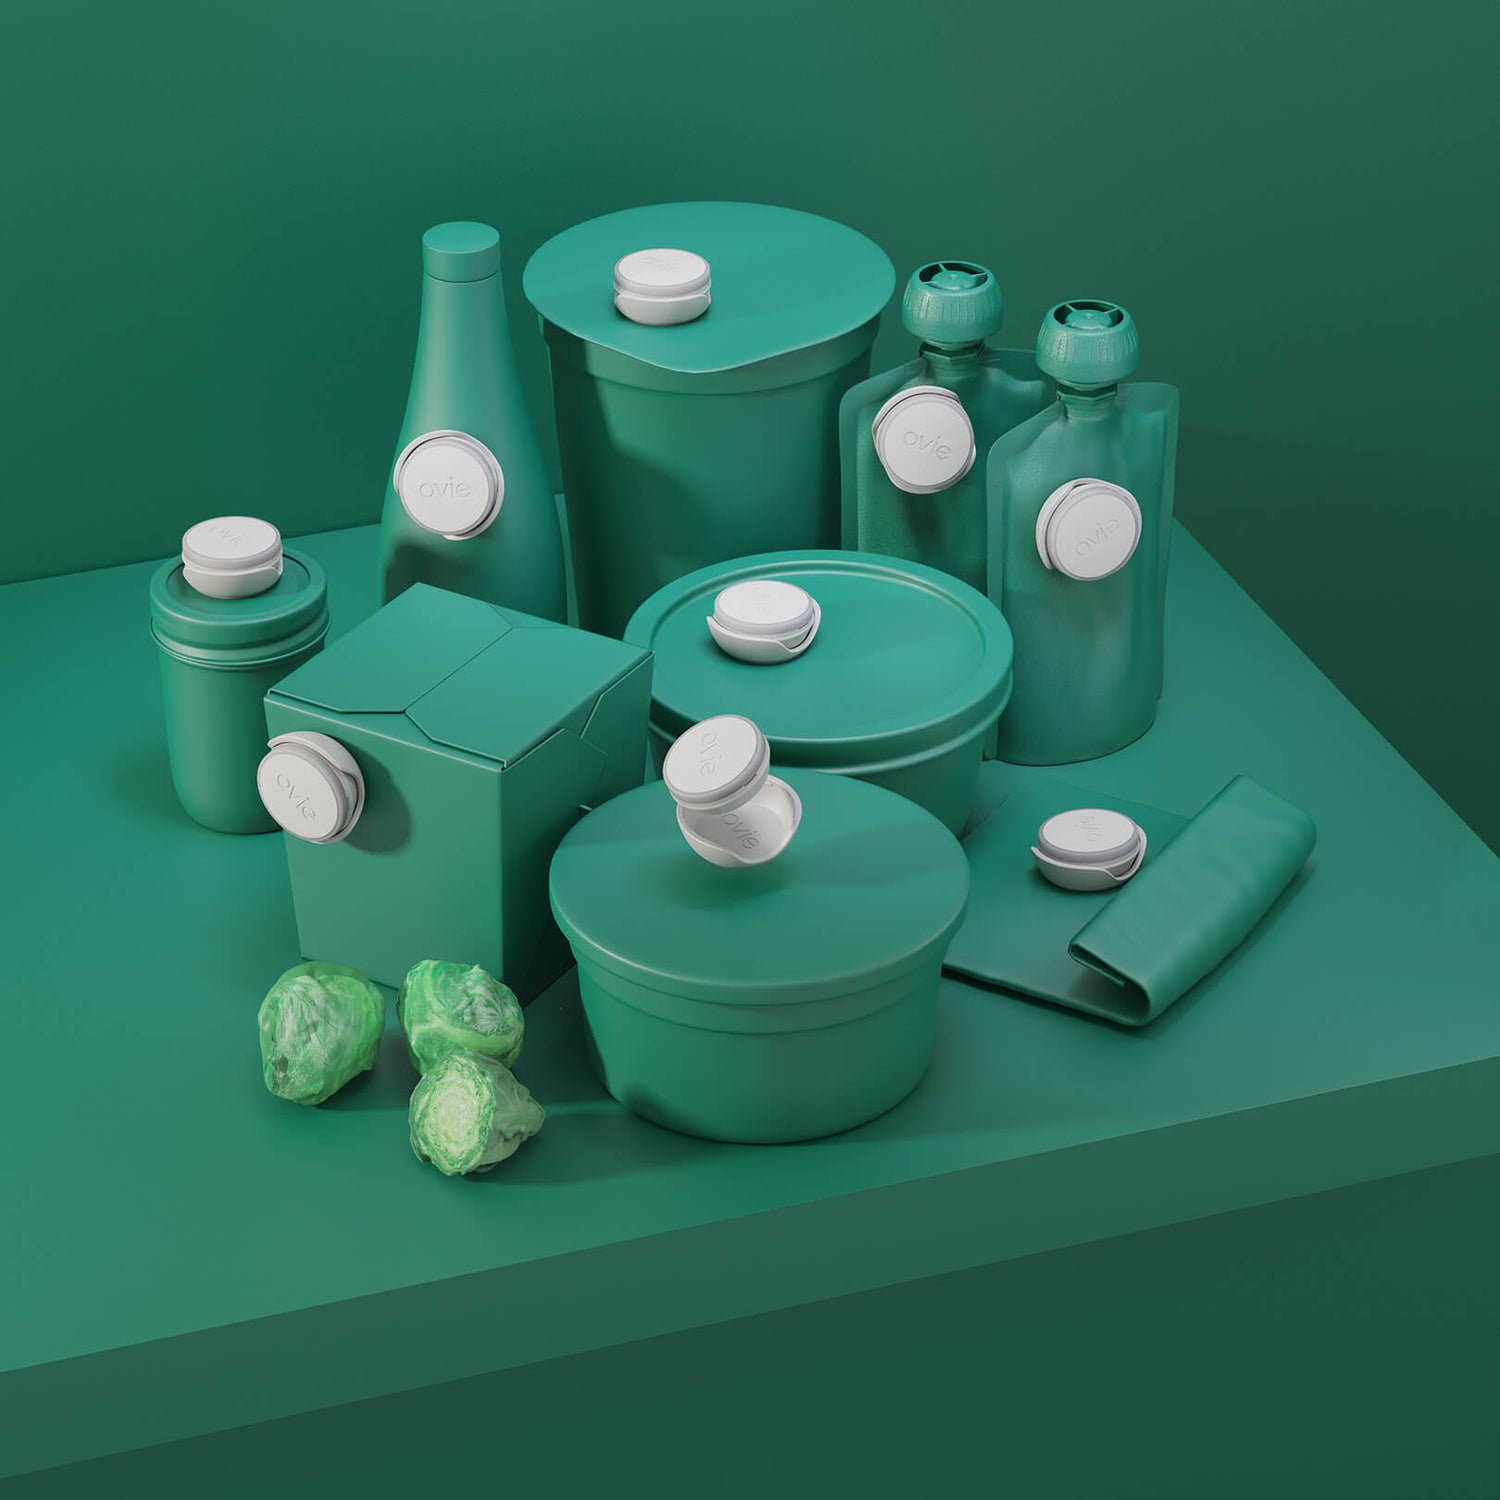 Stylized dark green image with 9 Ovie LightTags placed on various food-shaped containers that match the background. All LightTags are unlit